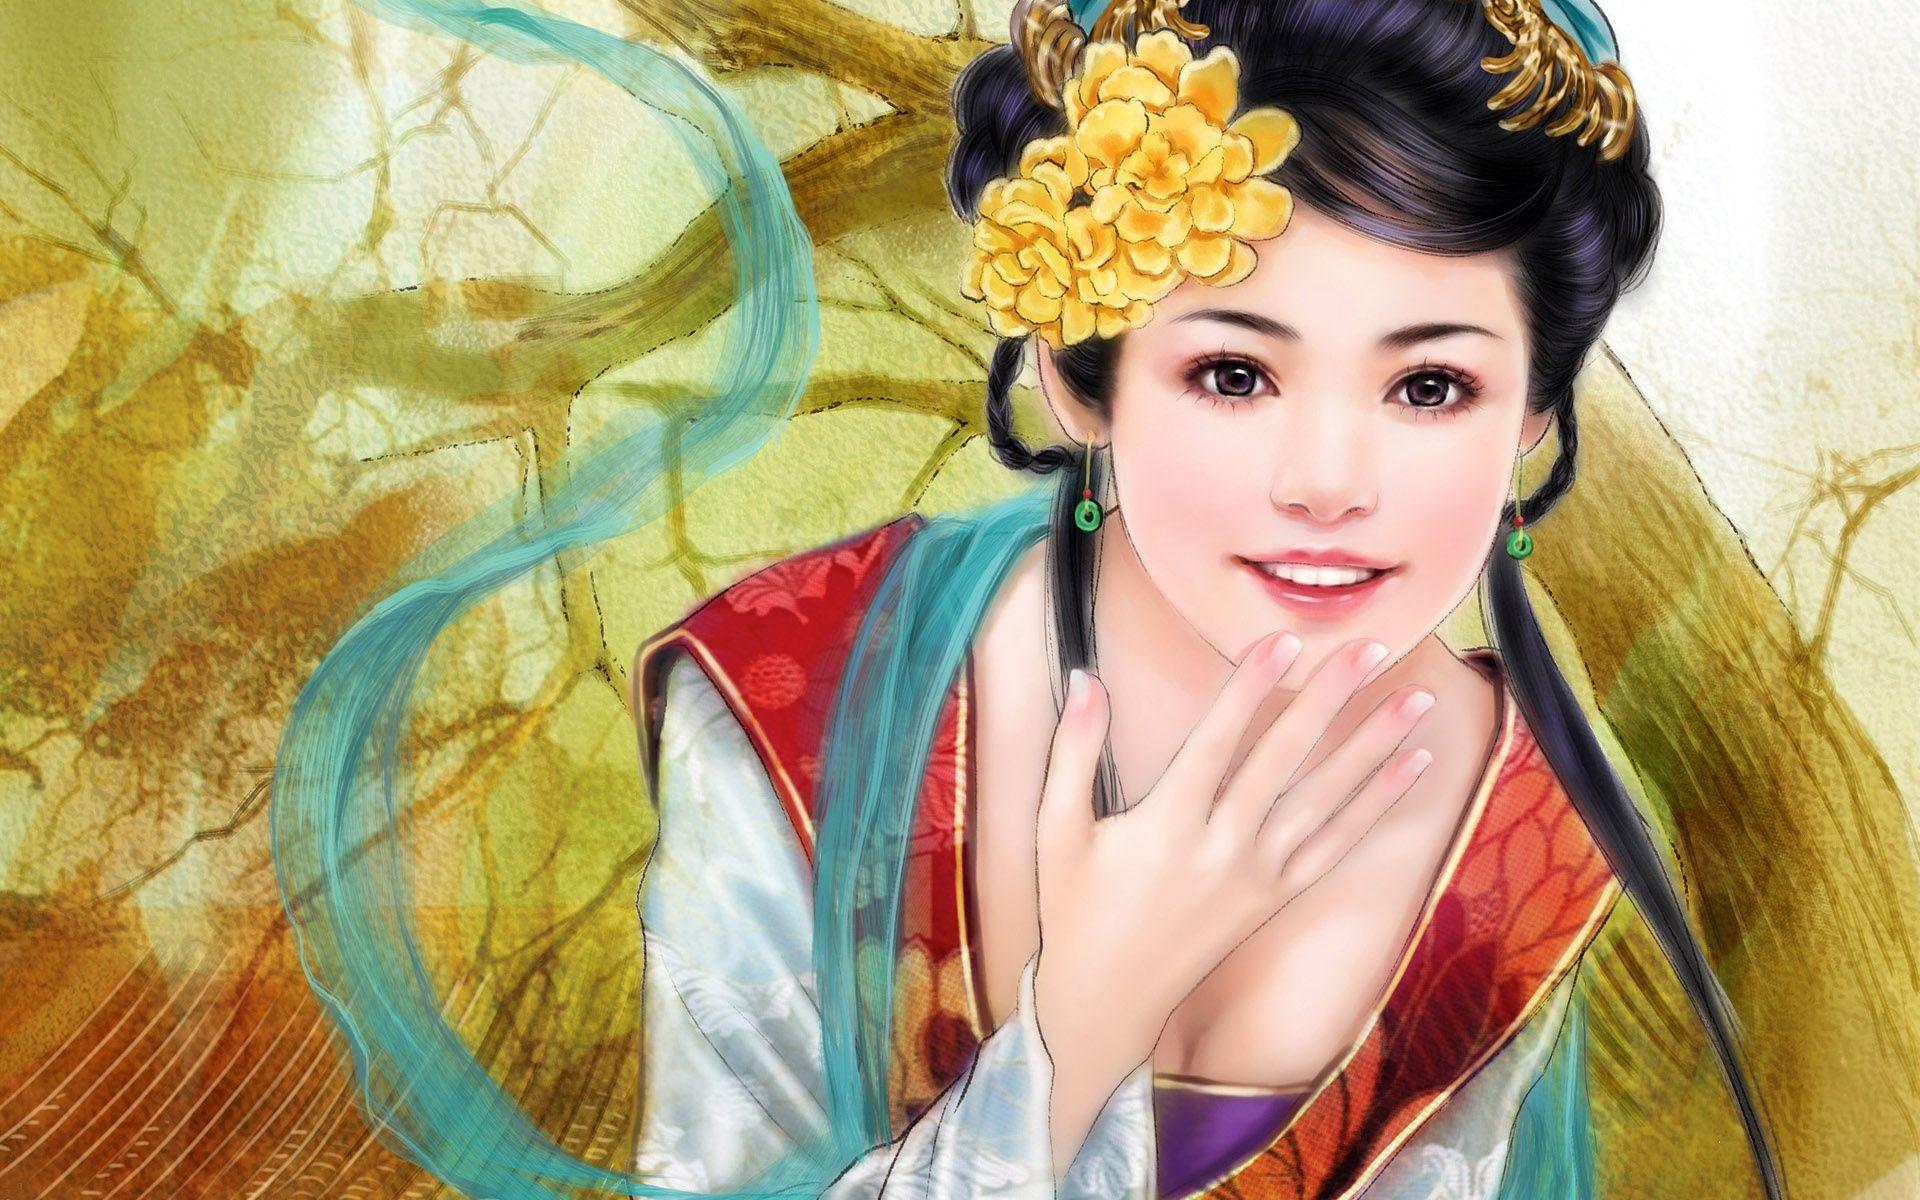 Gorgeous Japanese girl painting. Painting of girl